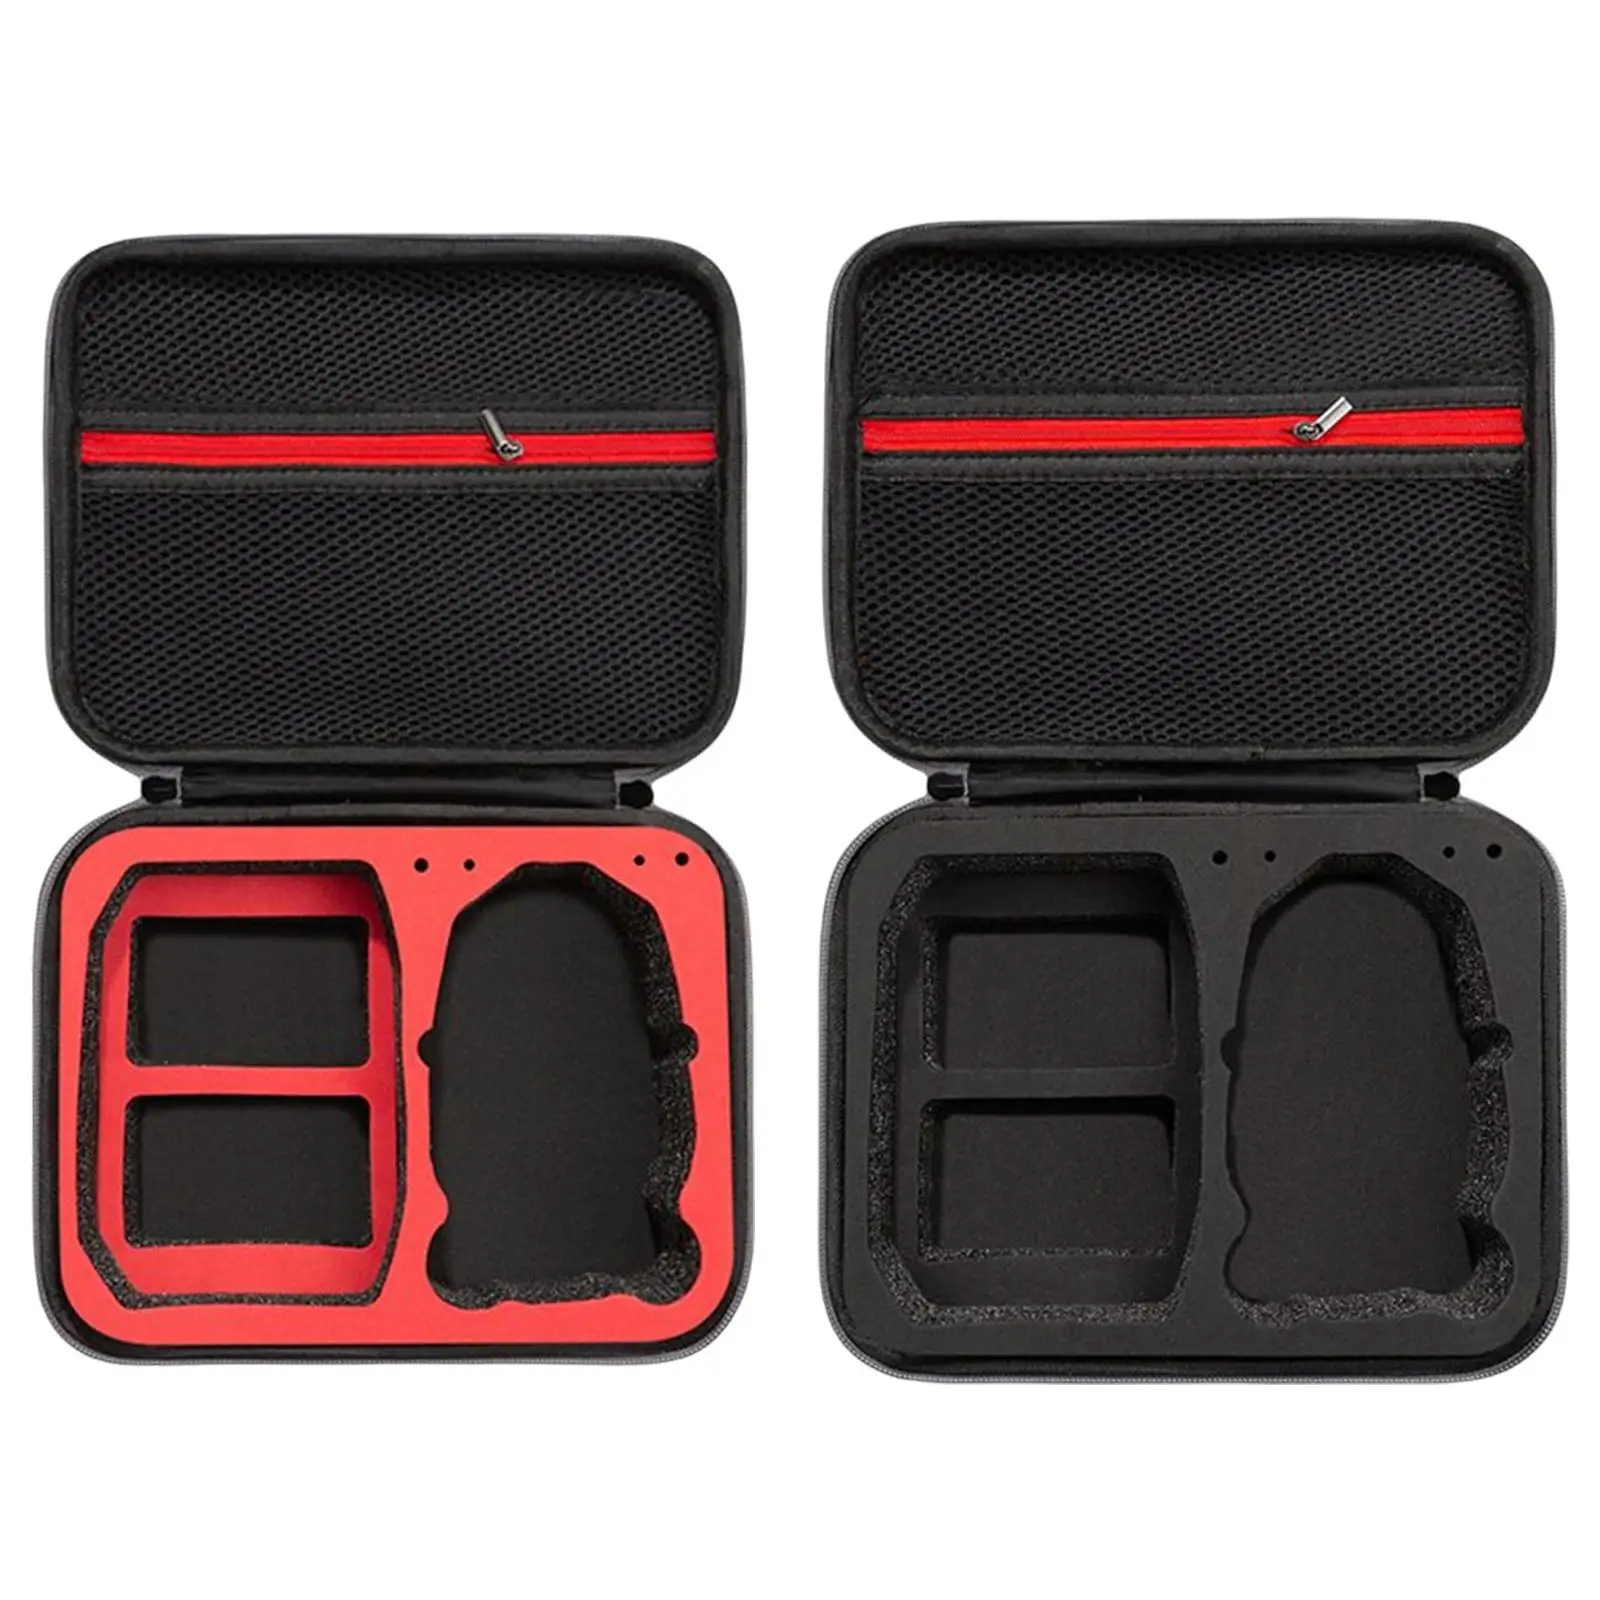 Portable Drone Carrying Case Travel Bag Wear Resistant Shockproof Storage Bag Protective Case for DJI Mini 3 Pro RC Drone Parts